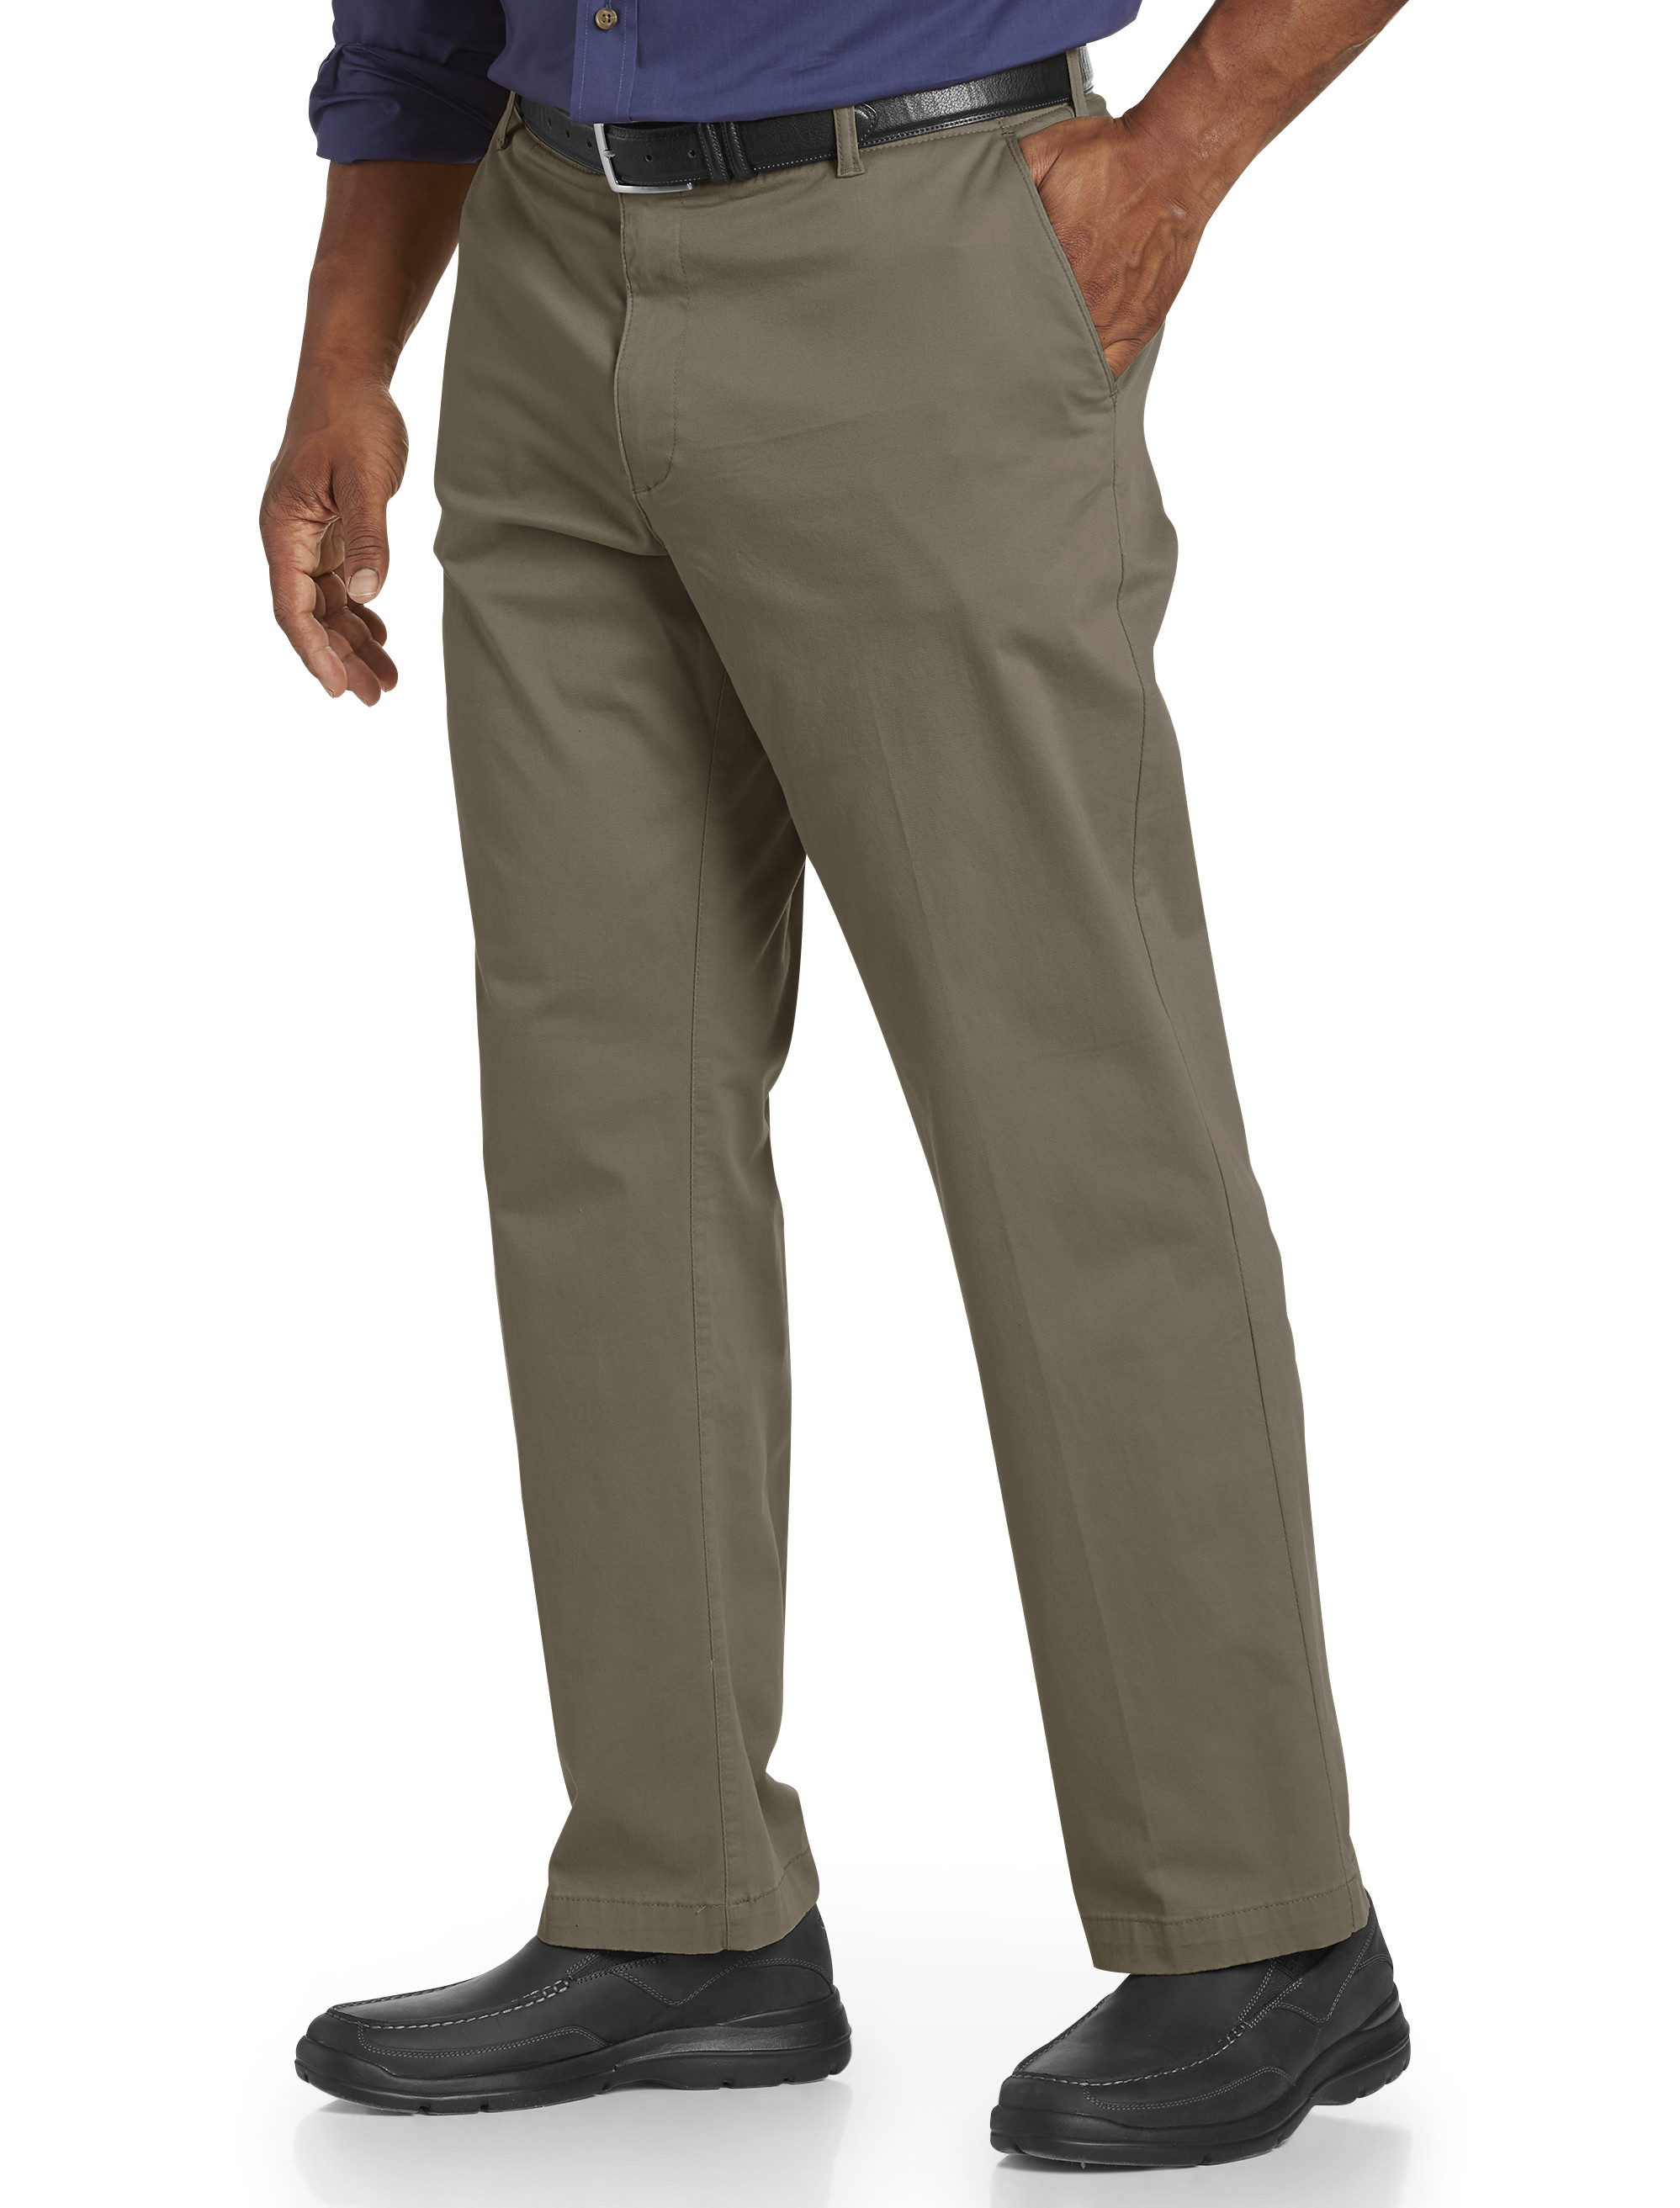 Oak Hill by DXL Men's Big and Tall Straight-Fit Tech Pants